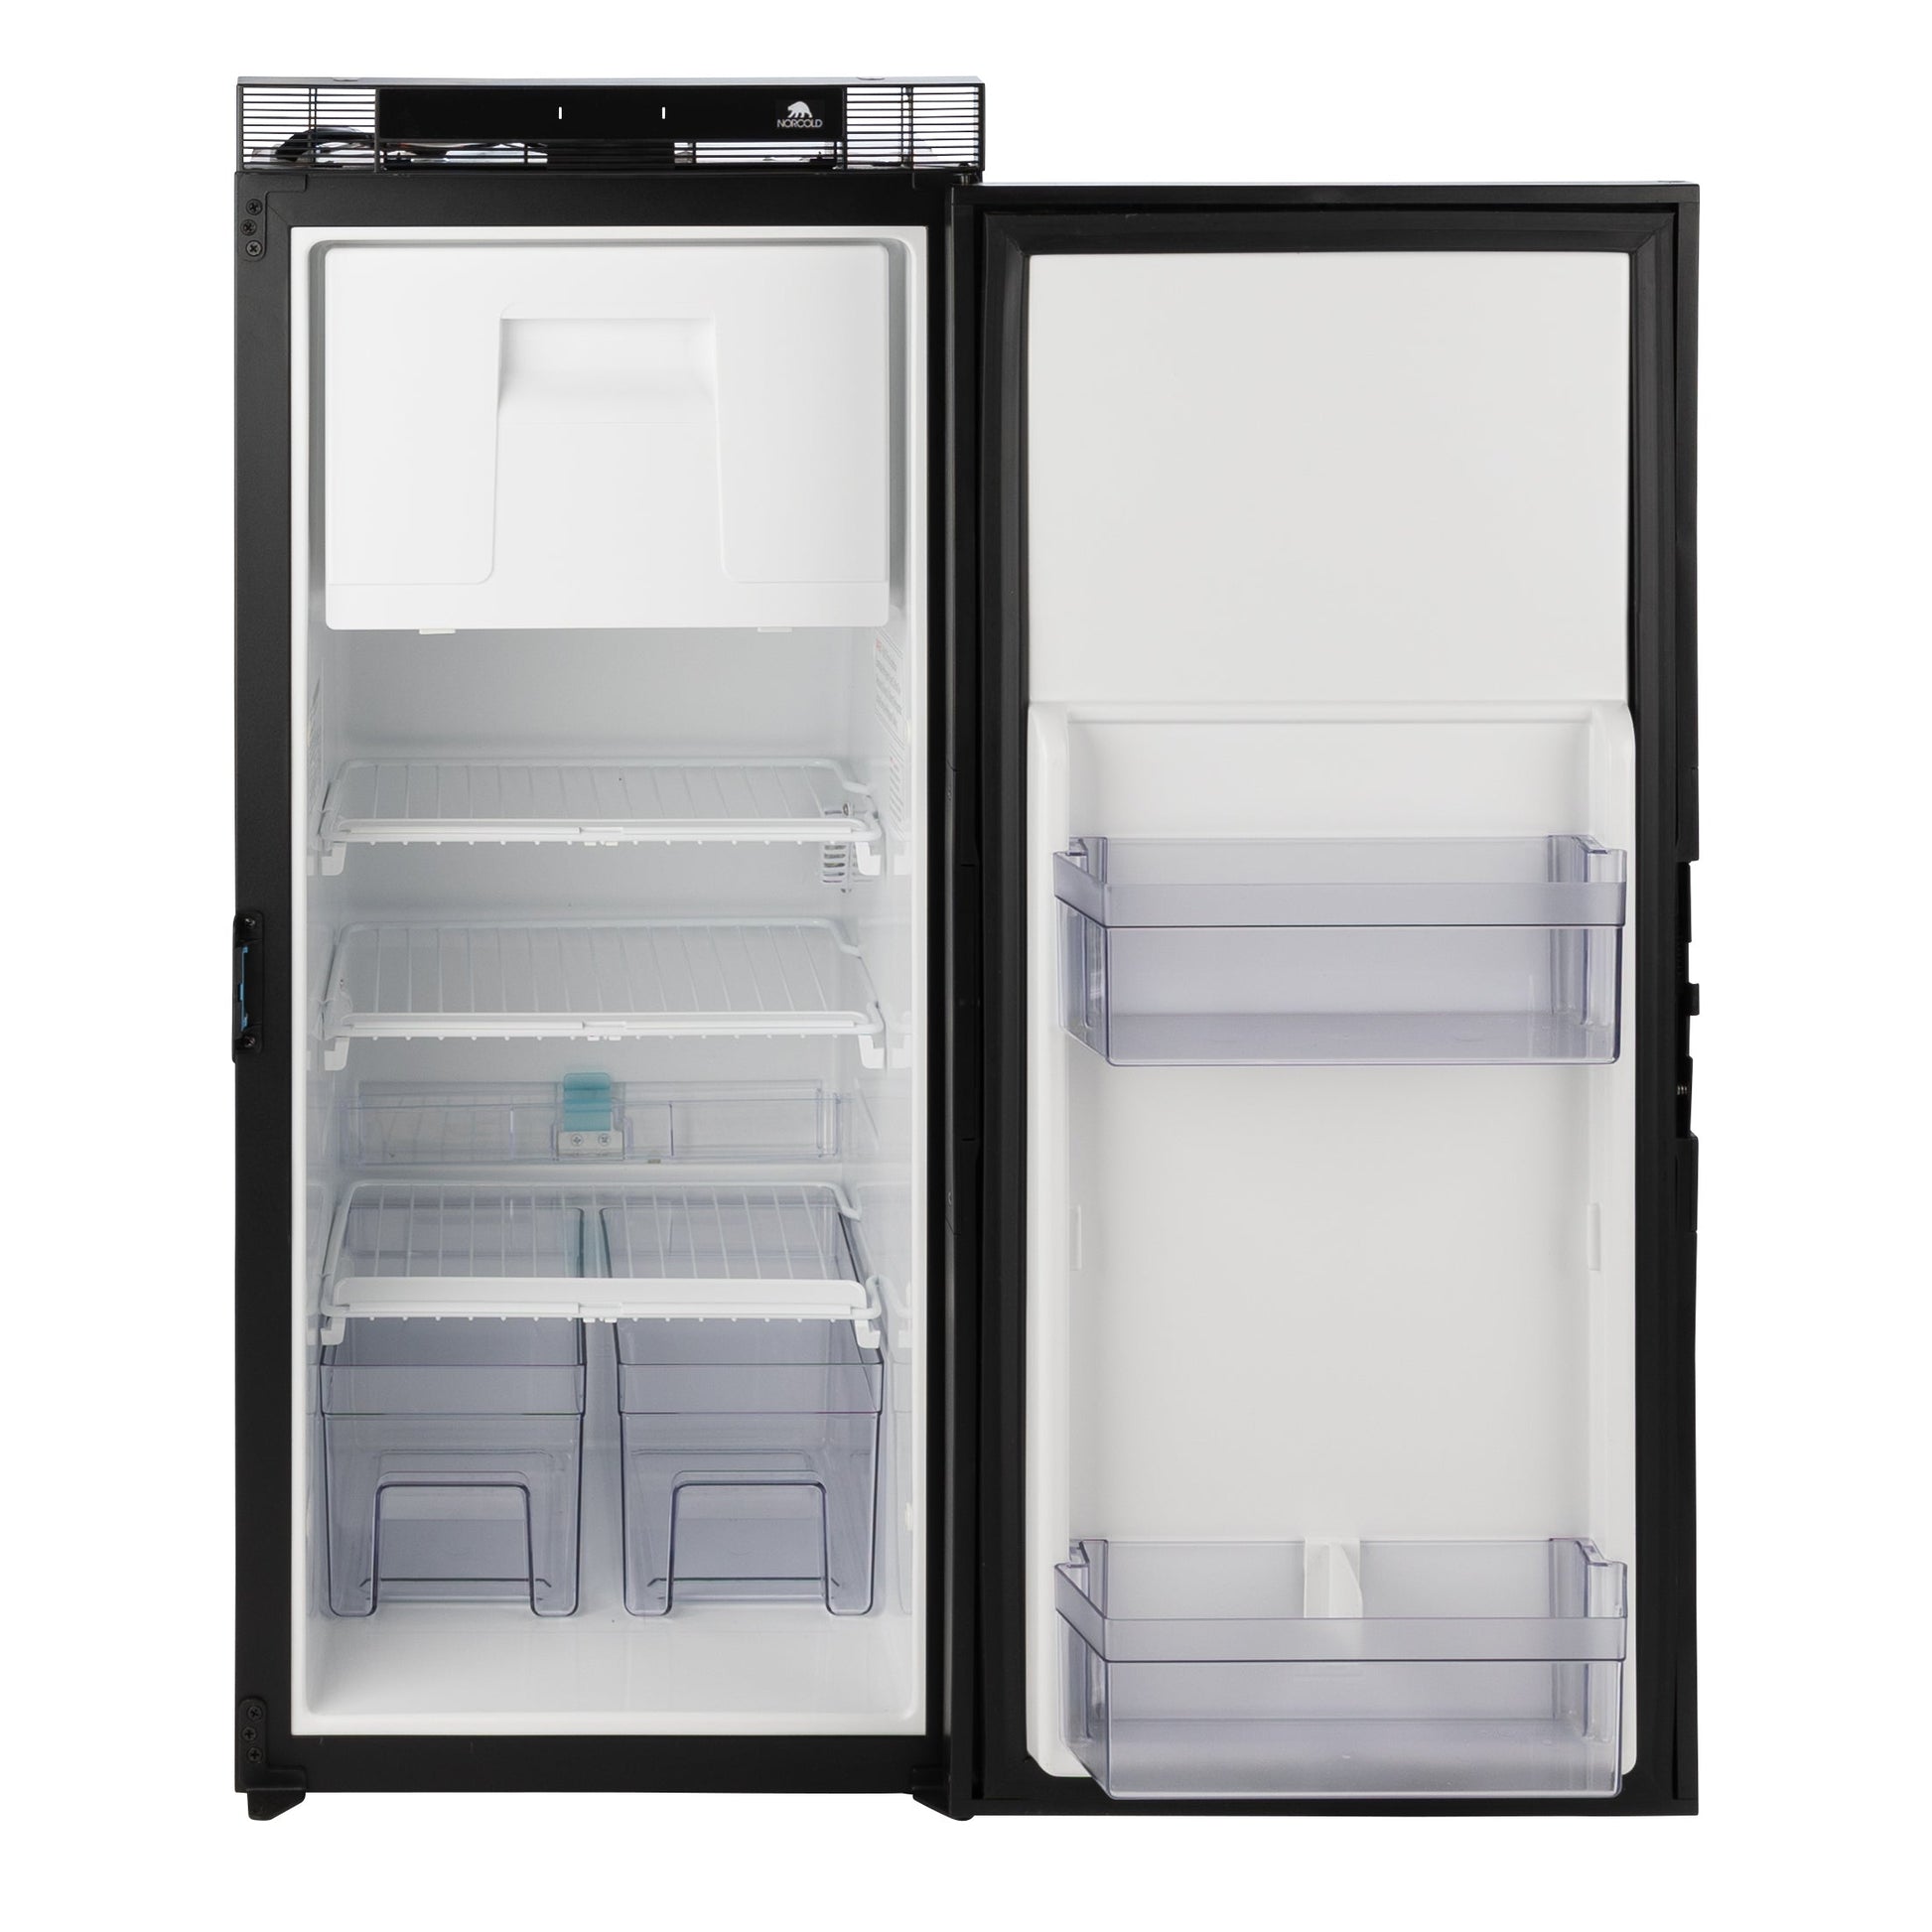 Norcold N2090BPR Dual Compartment Single Door Refrigerator With Freezer - N6DN2090BPR